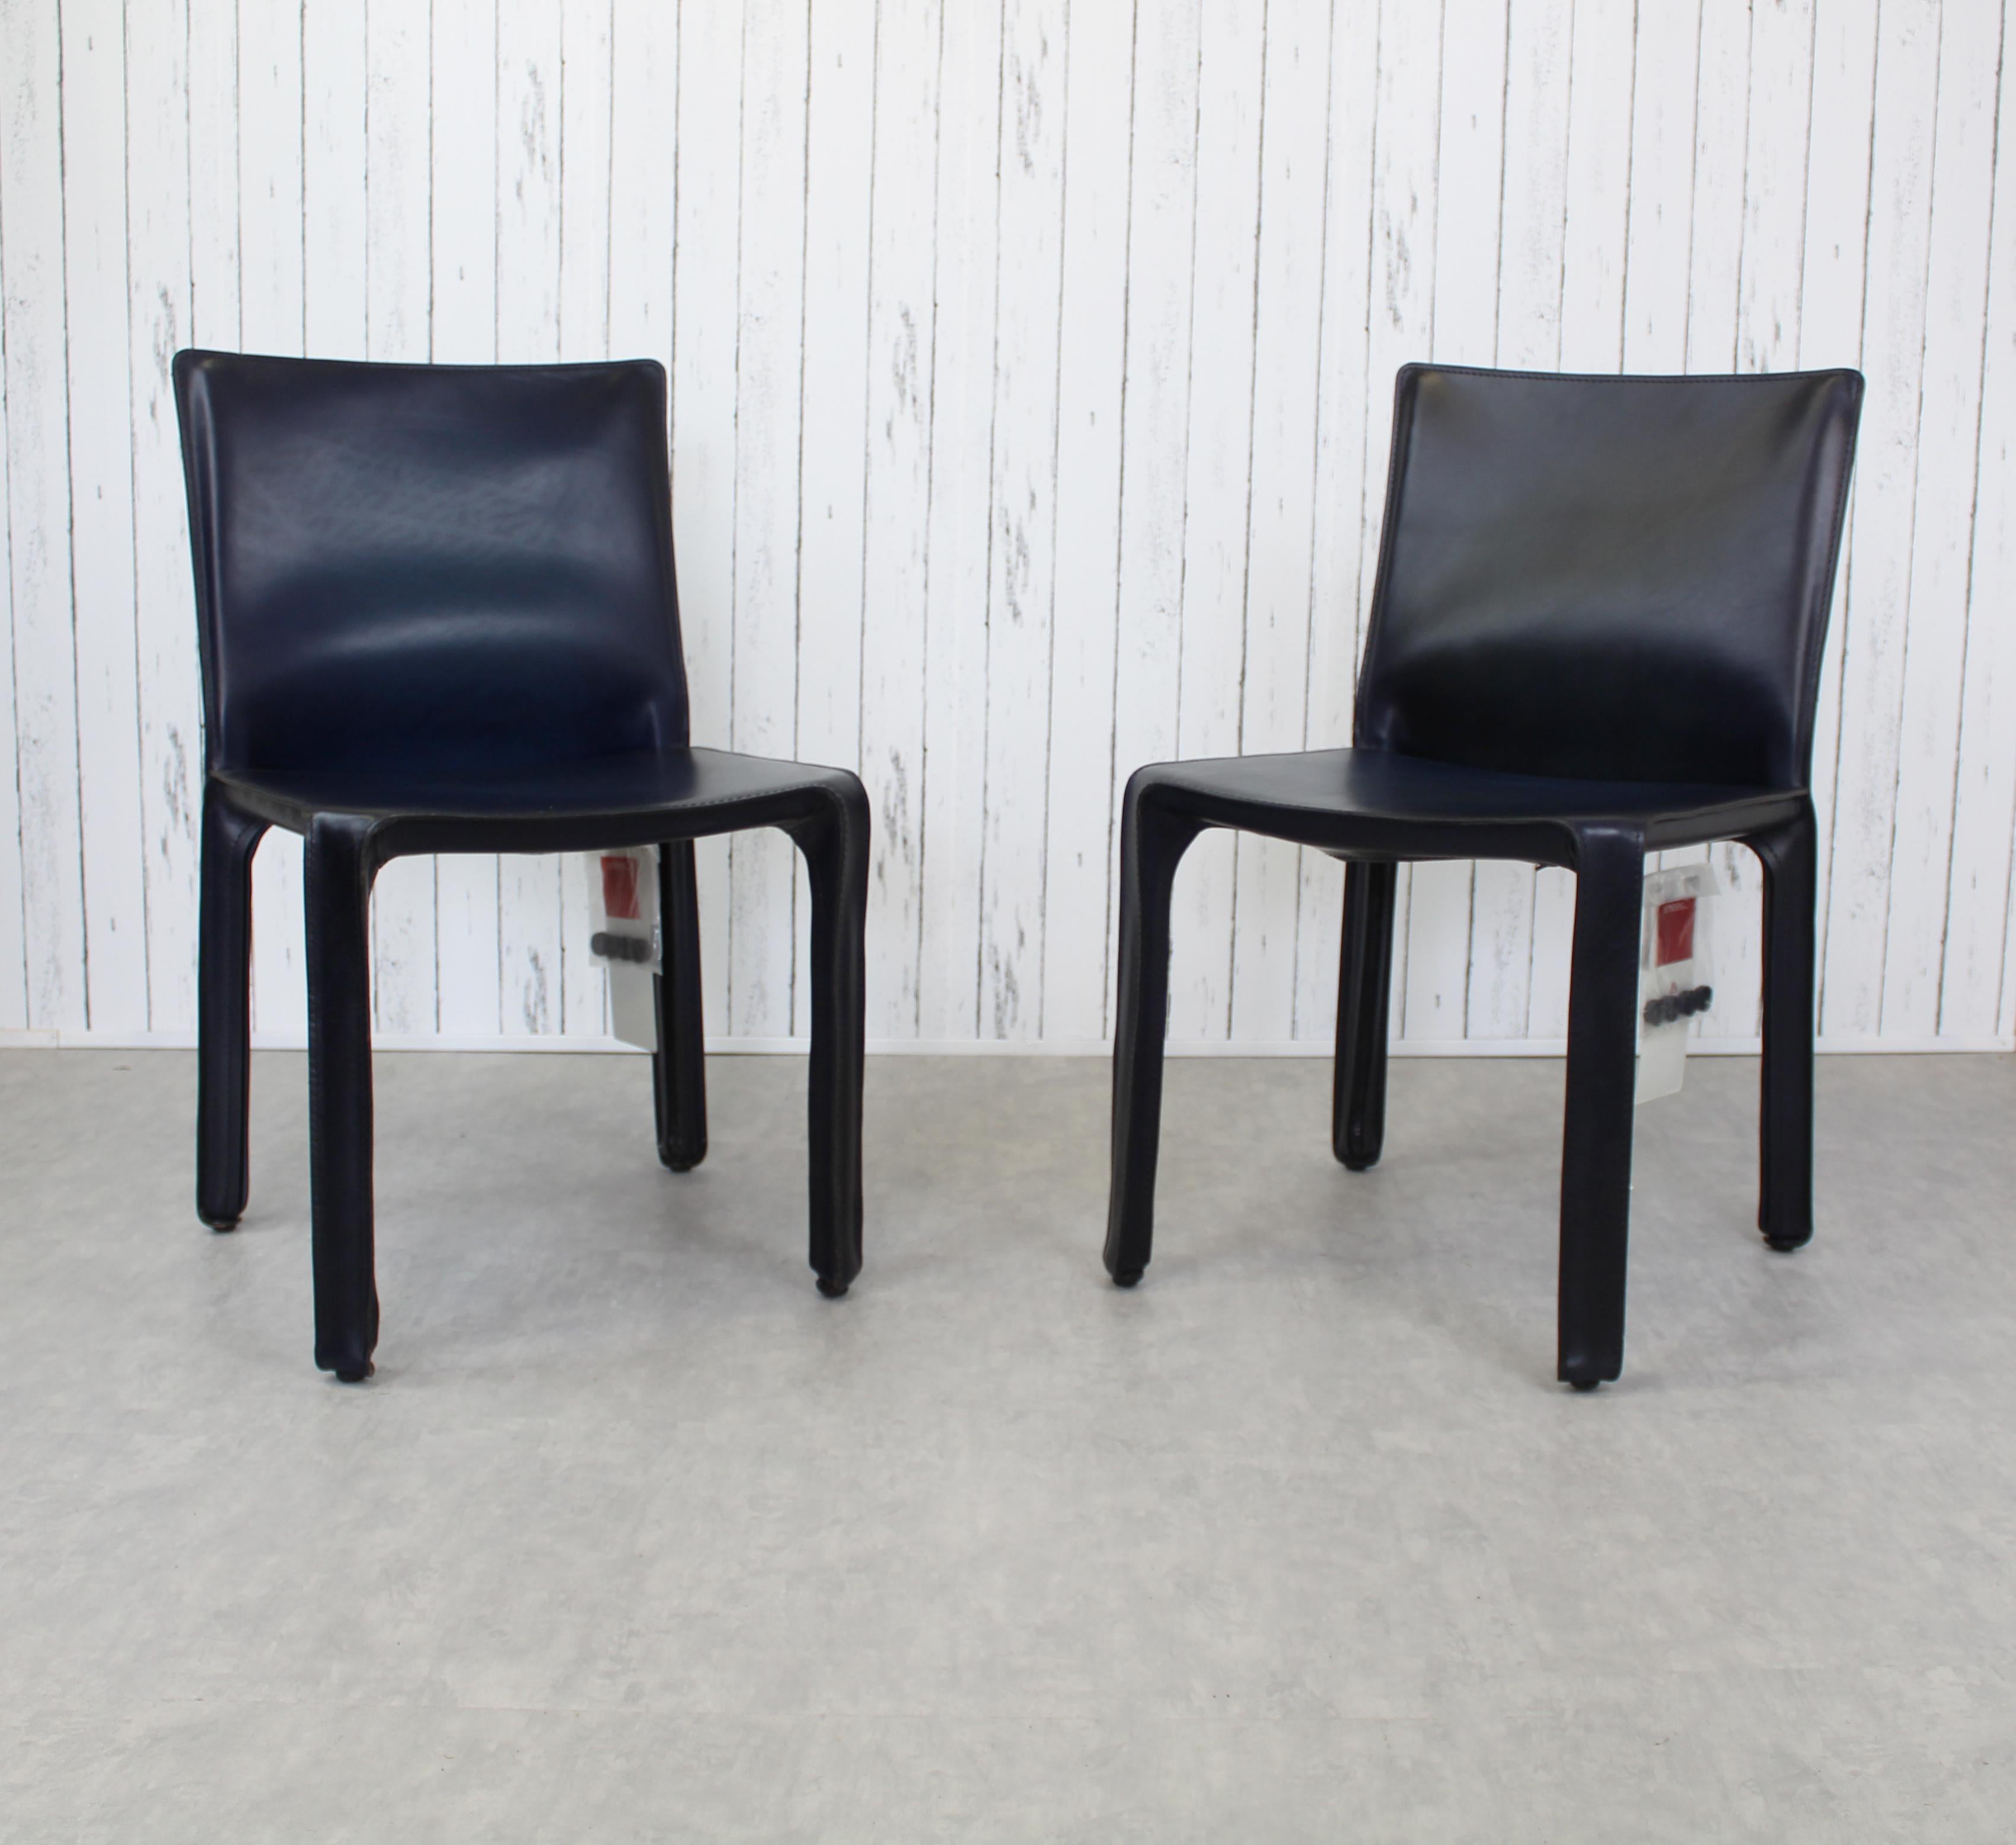 Set of 2 Cab 412 chairs in blue leather tending to black by Mario Bellini for Cassina as new, perfect overall condition.
The Cab chair consists of a tubular frame to which thick leather is applied.
The leather is held in place with zippers on the